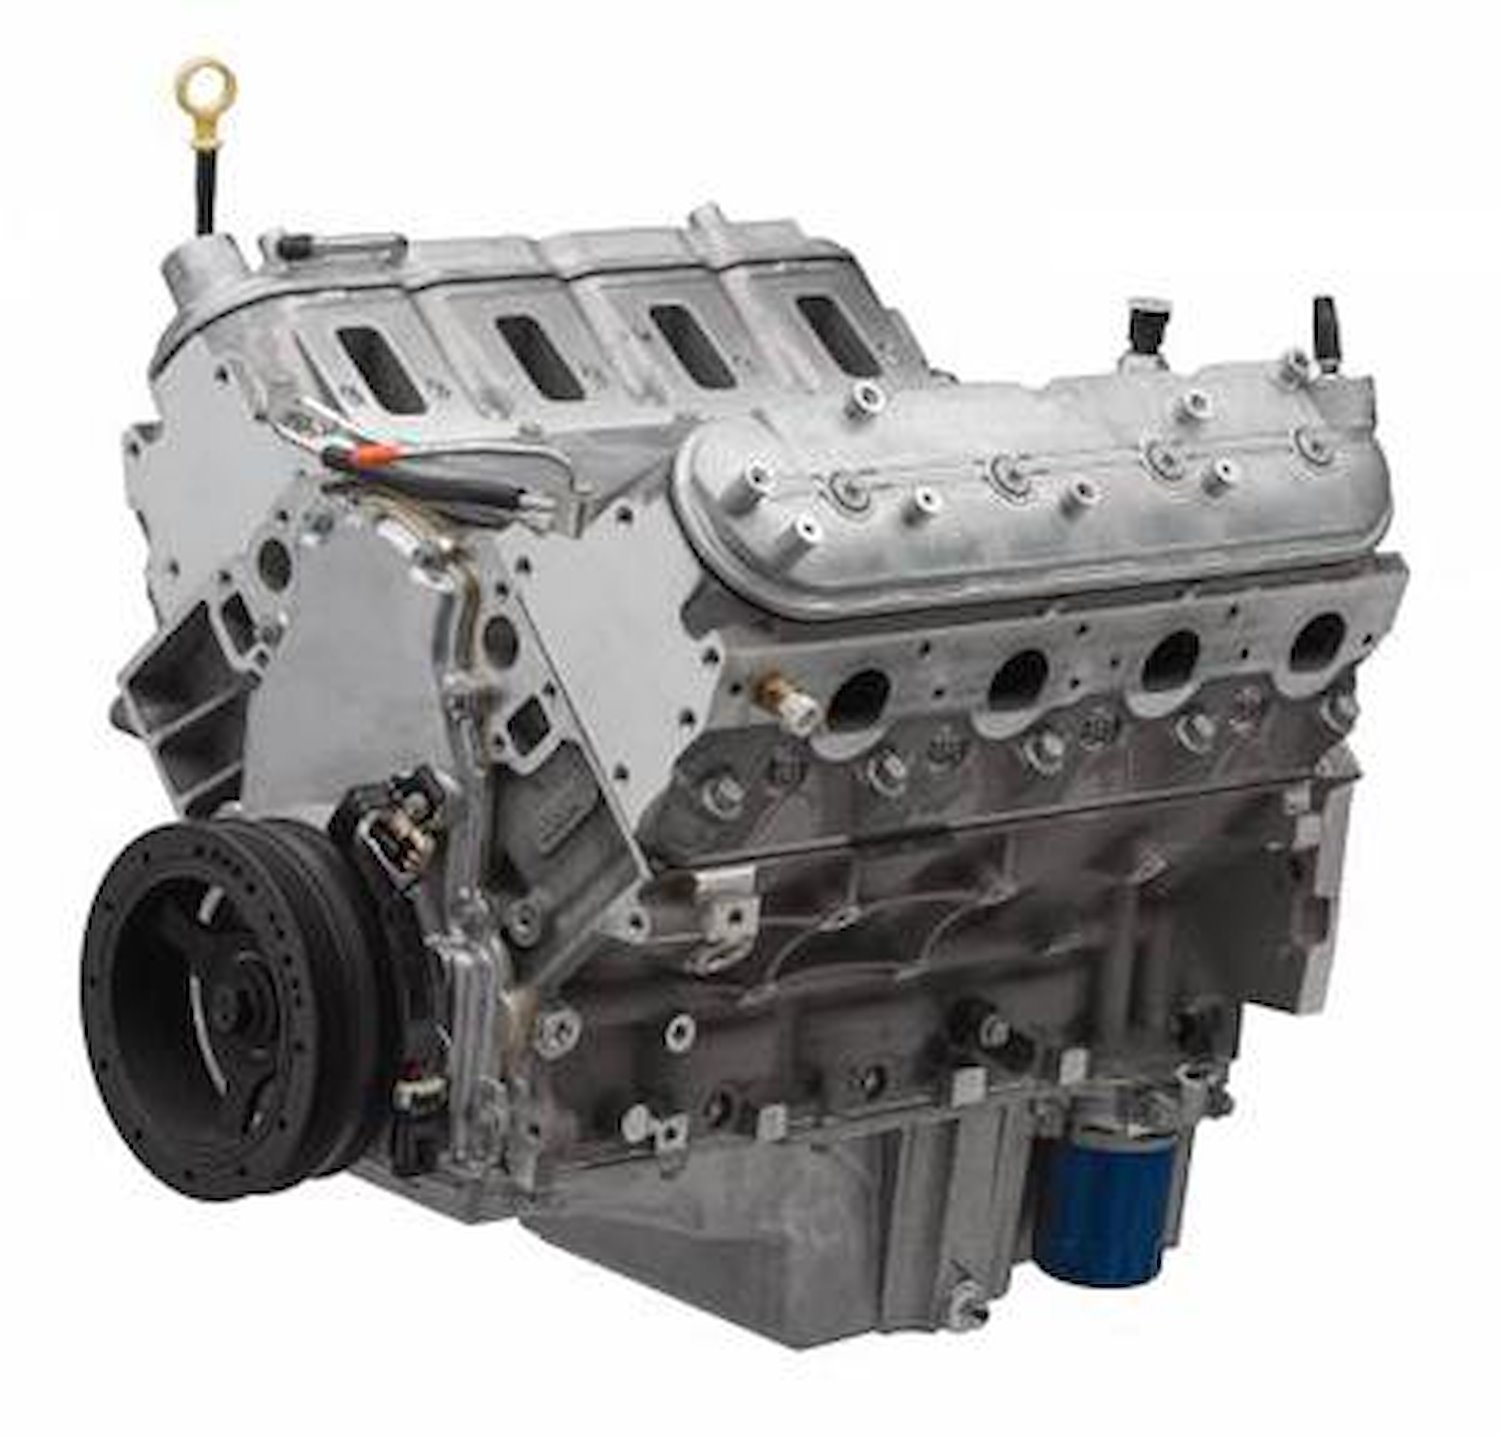 GM LS3 6.2L Base Crate Engine Long Block Assembly [430 HP 424 ft.-lbs of TQ]